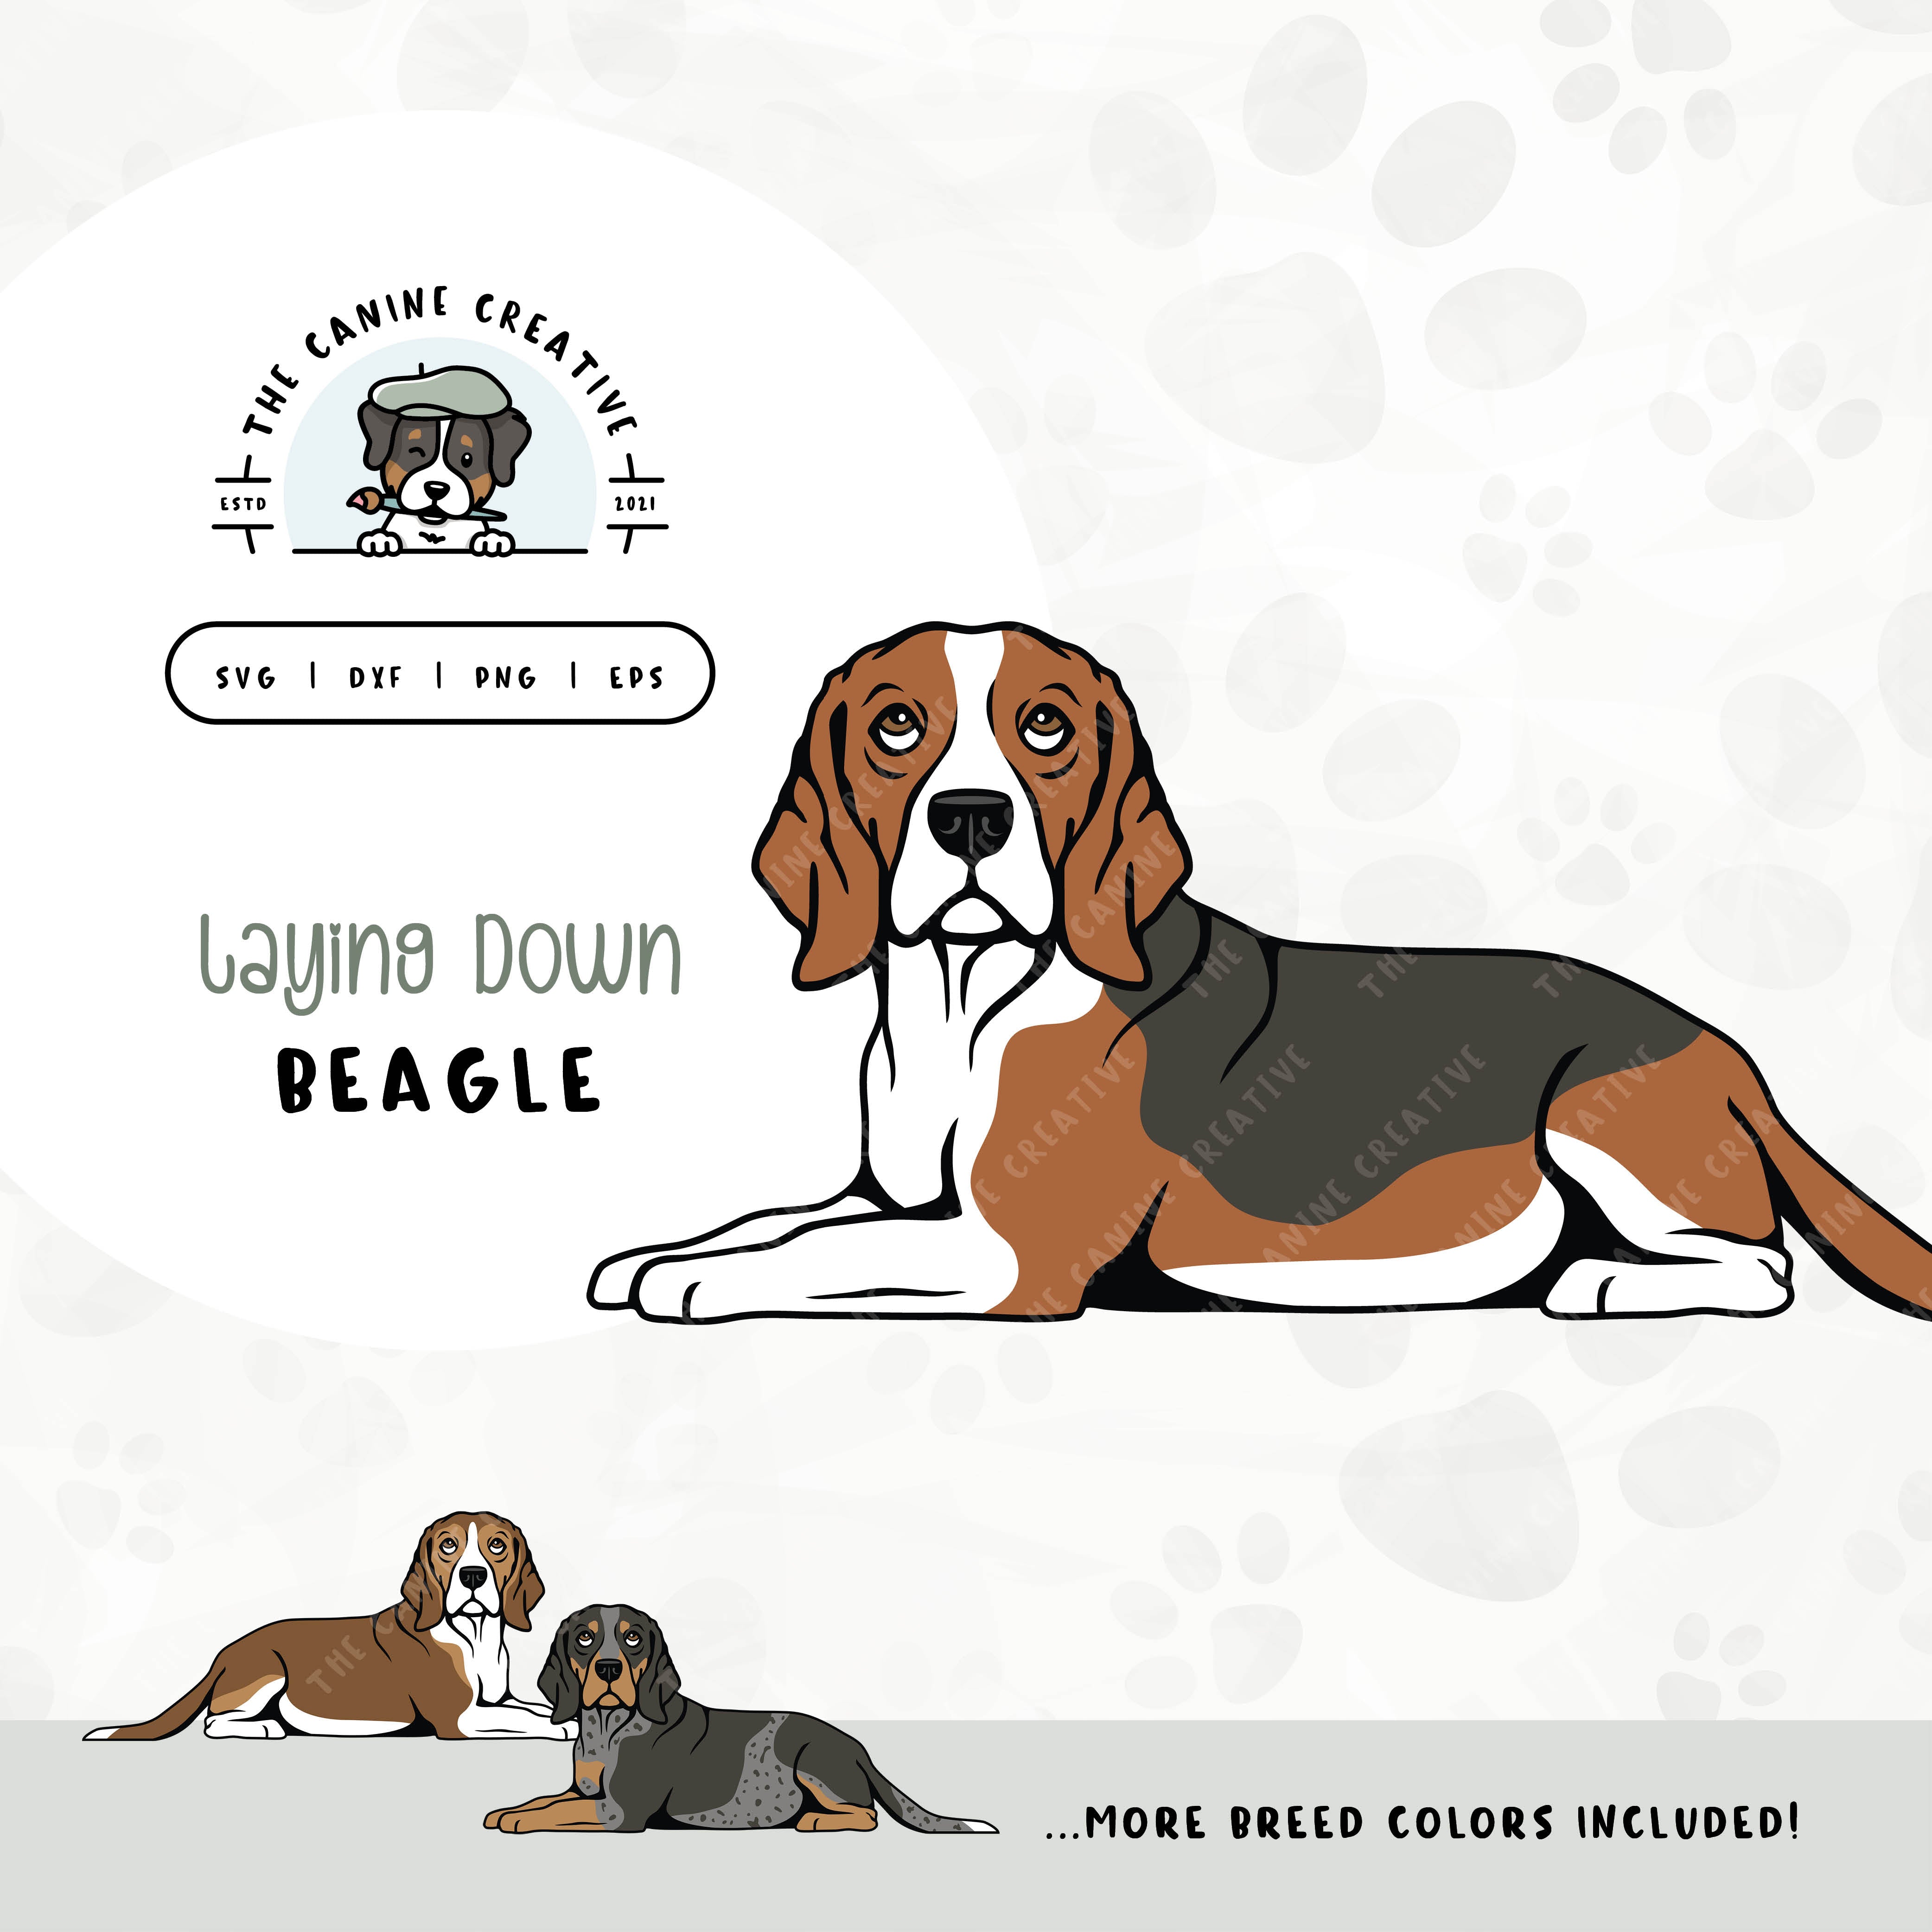 This laying down dog design features a Beagle. File formats include: SVG, DXF, PNG, and EPS.